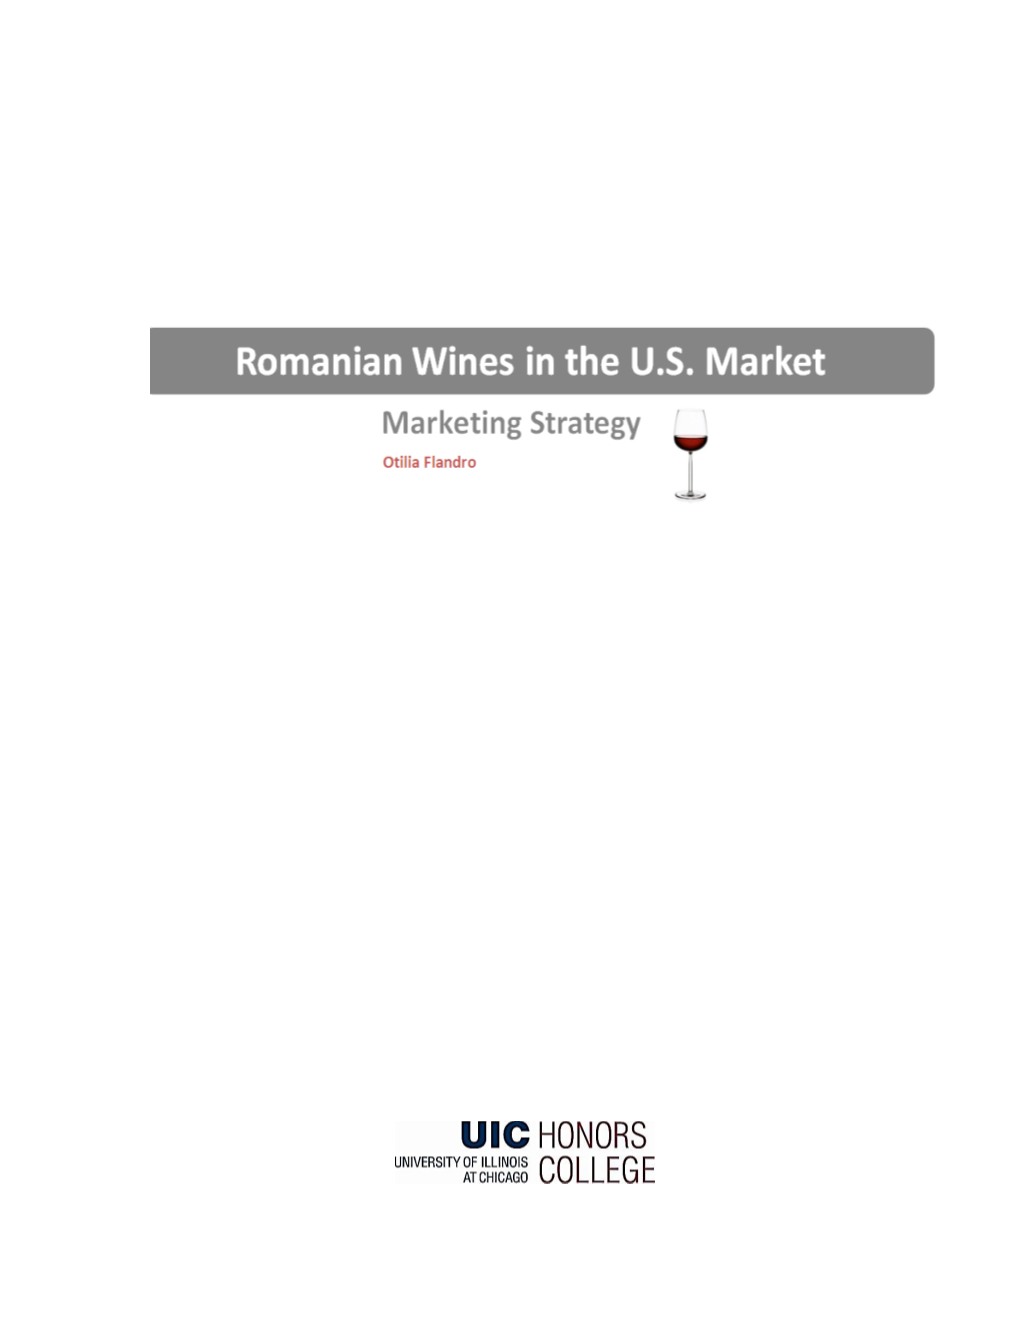 Marketing Strategy for Romanian Wines in the U.S. Market